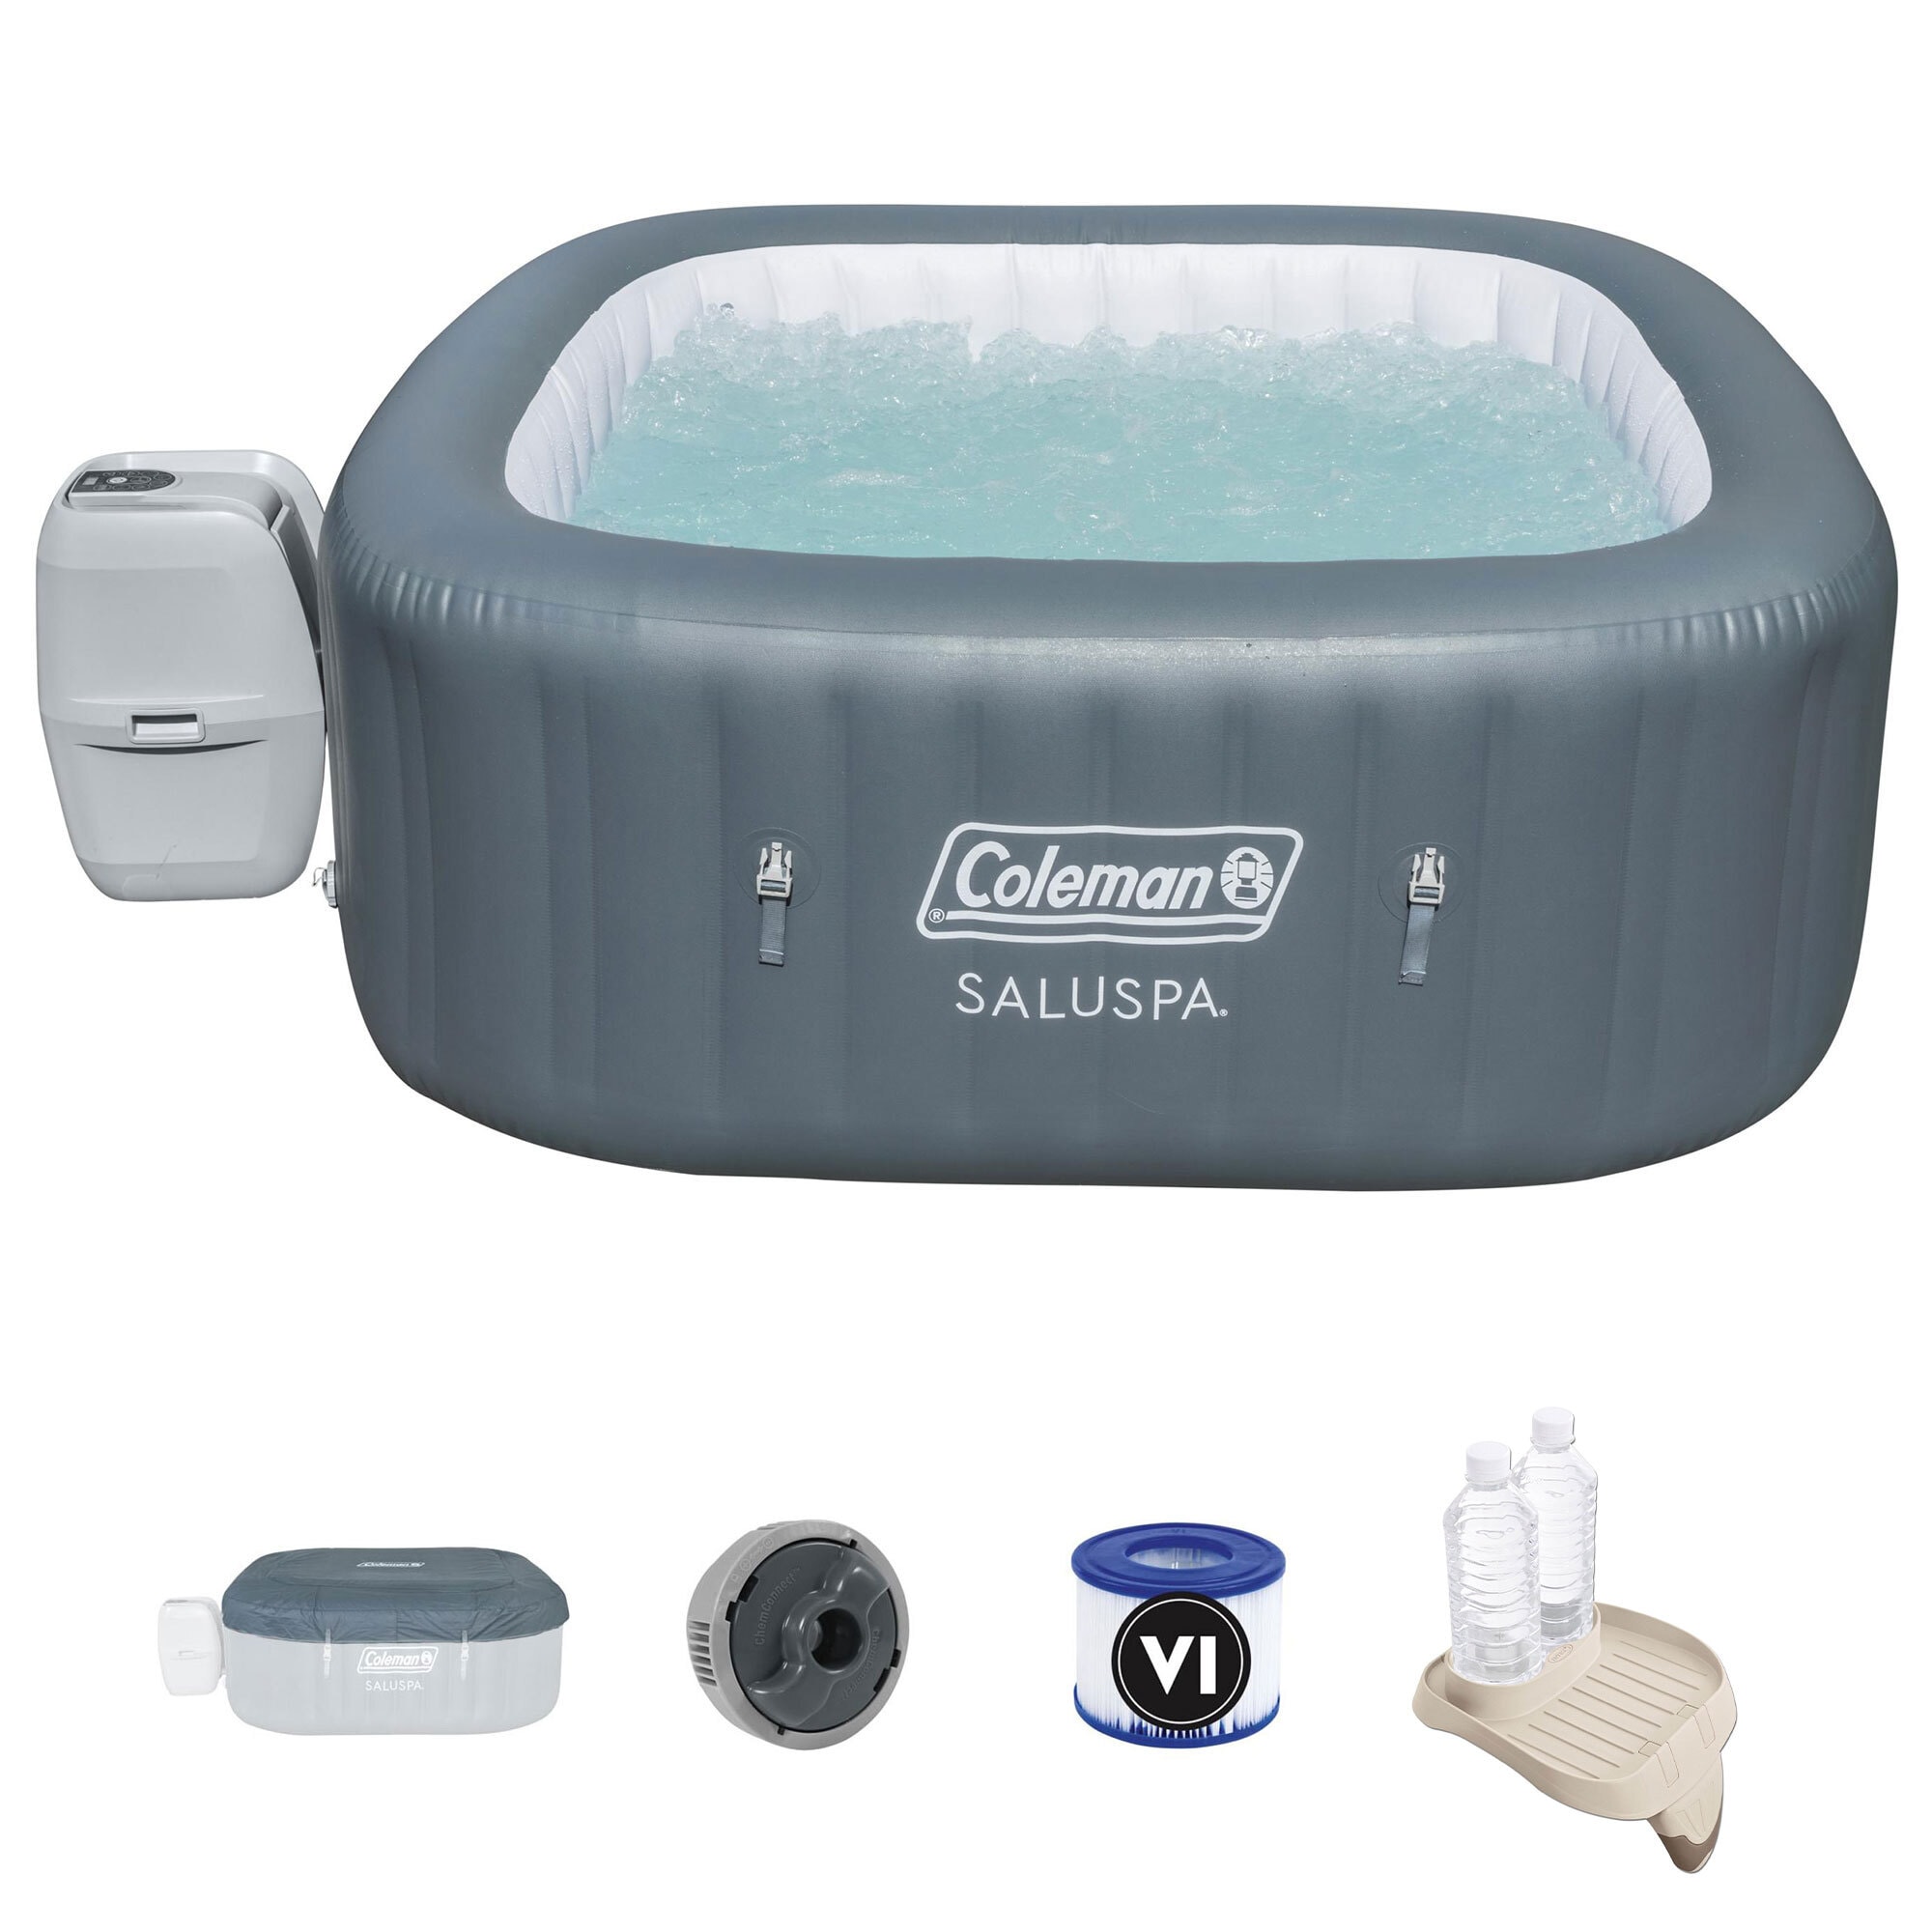 Hot x in Tub & Spas Inflatable 28-in the department Square Bestway 4-Person 71-in Tubs at Hot